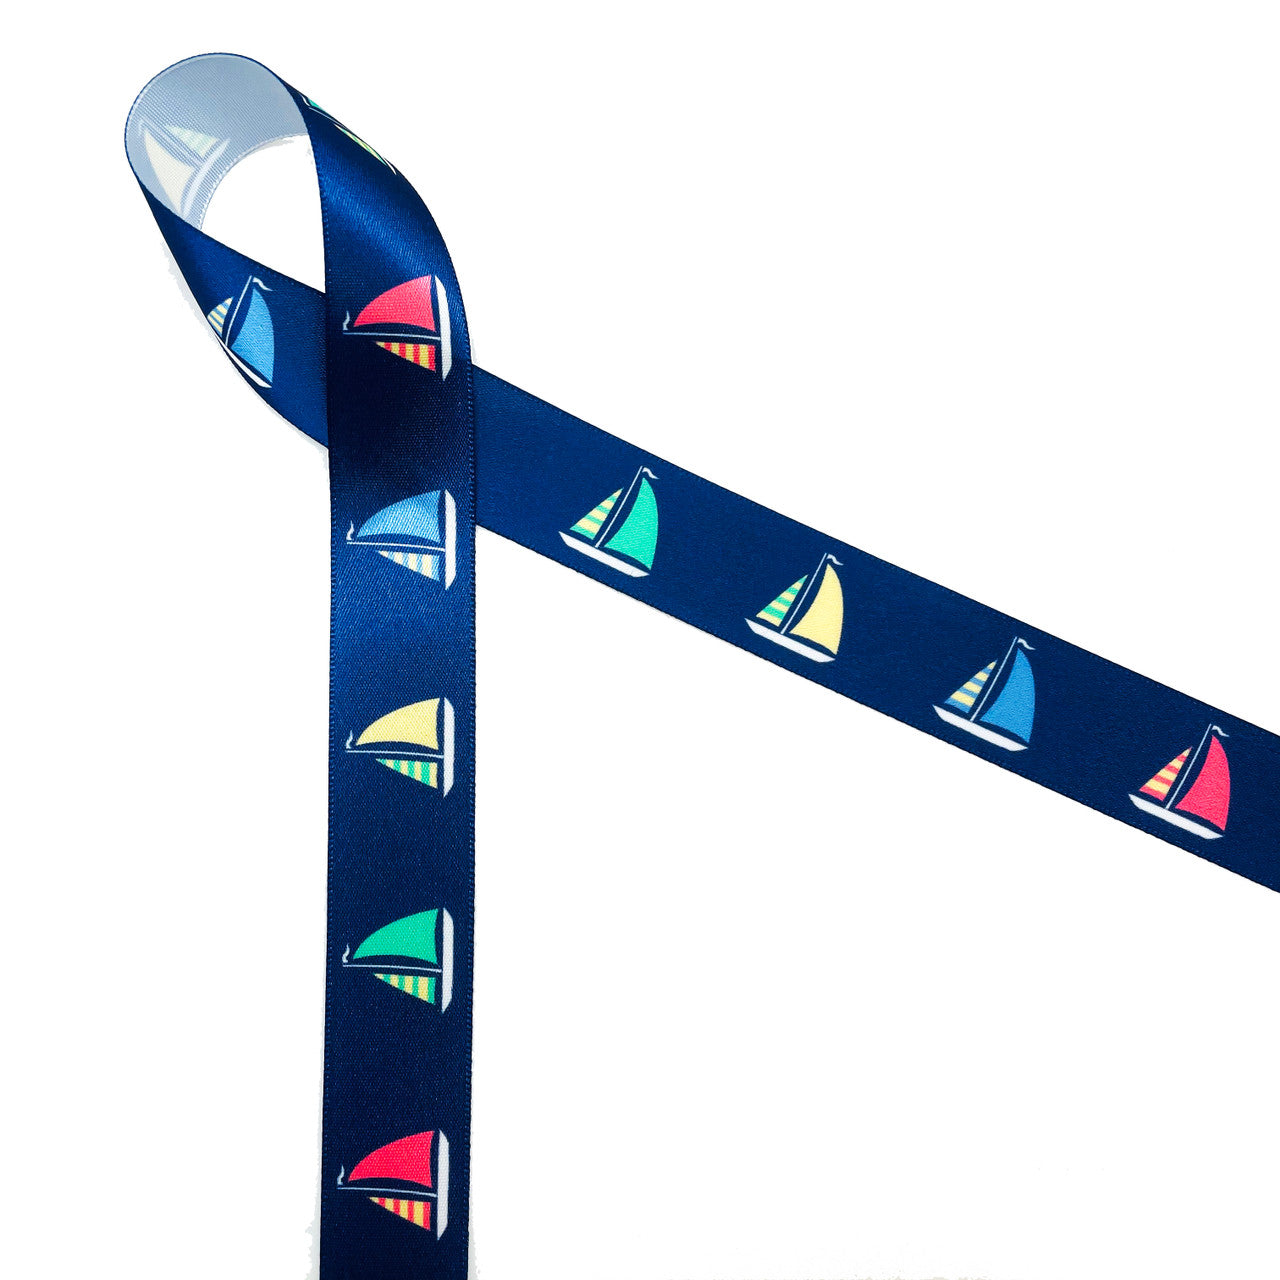 Sailboats with colorful billowing sails on a navy blue background printed on 7/8" white single face satin ribbon is a must for Summer seaside and lake side soirees! This is an ideal ribbon for gift wrap, party decor, favors and Summer crafting! All our ribbon is designed and printed in the USA!